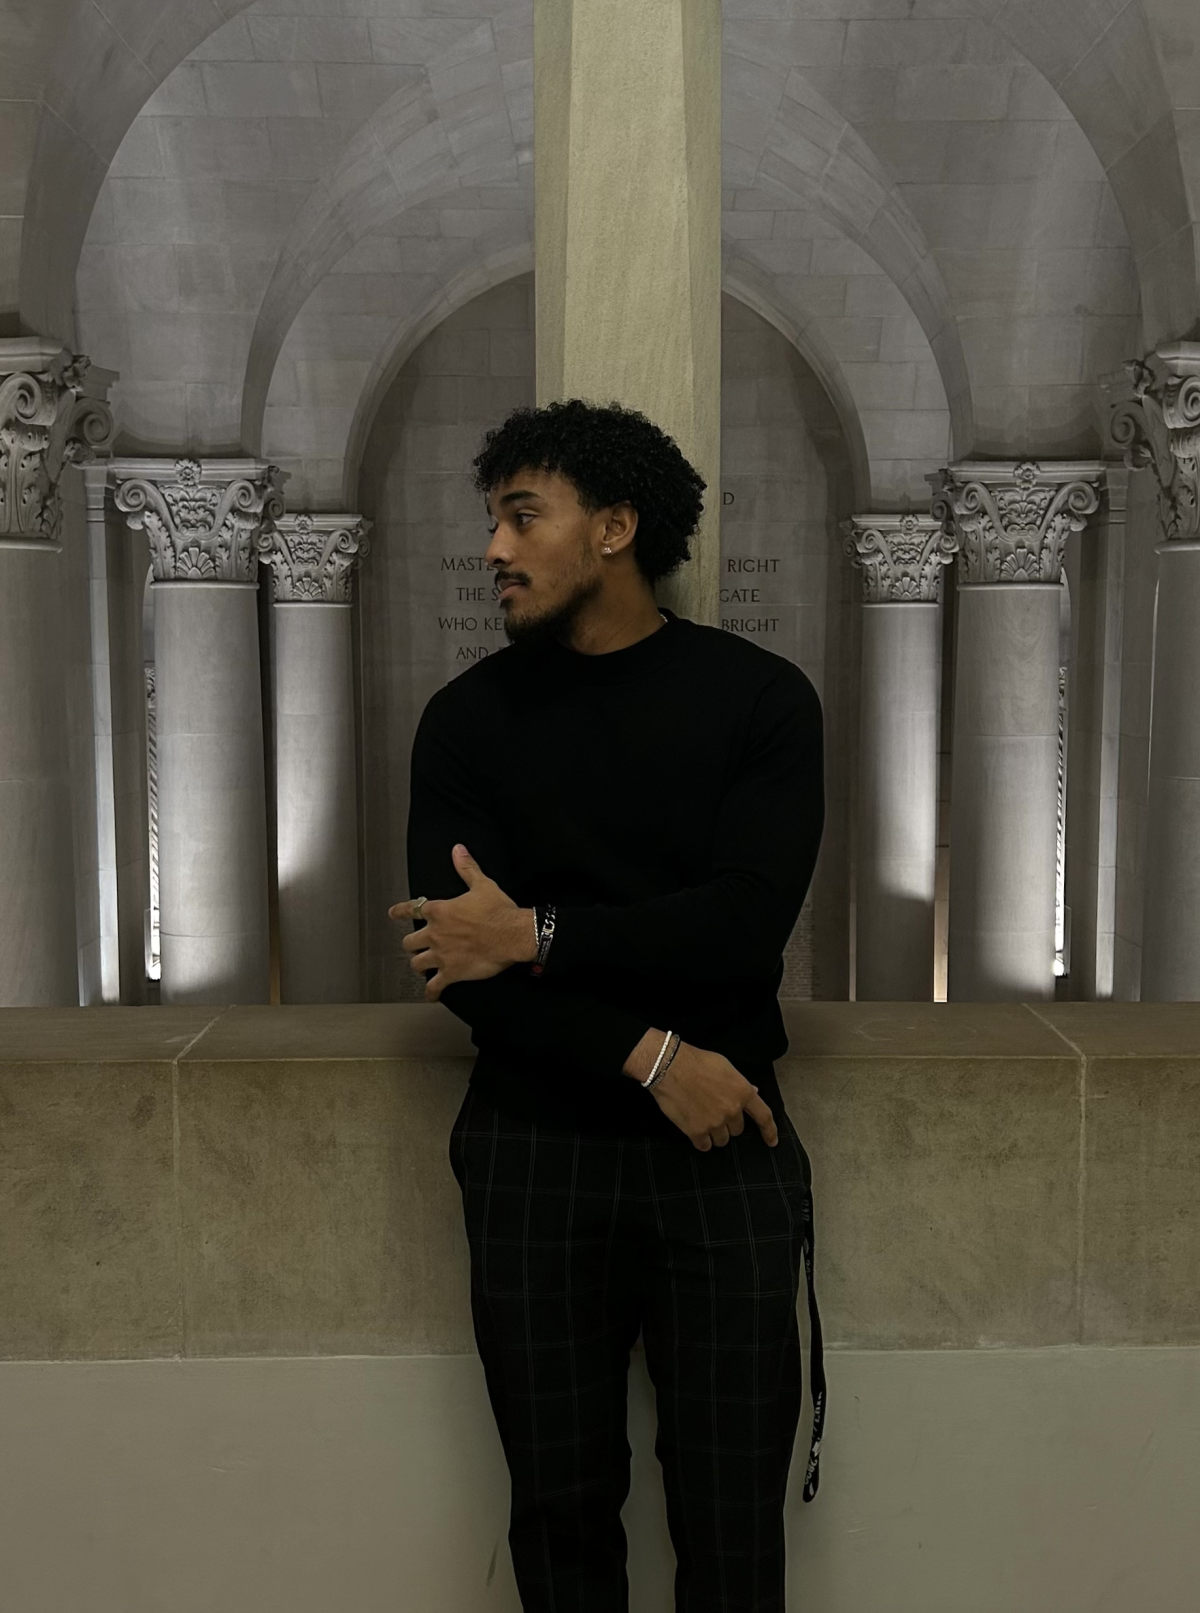 Image shows a male student in front of a marble background